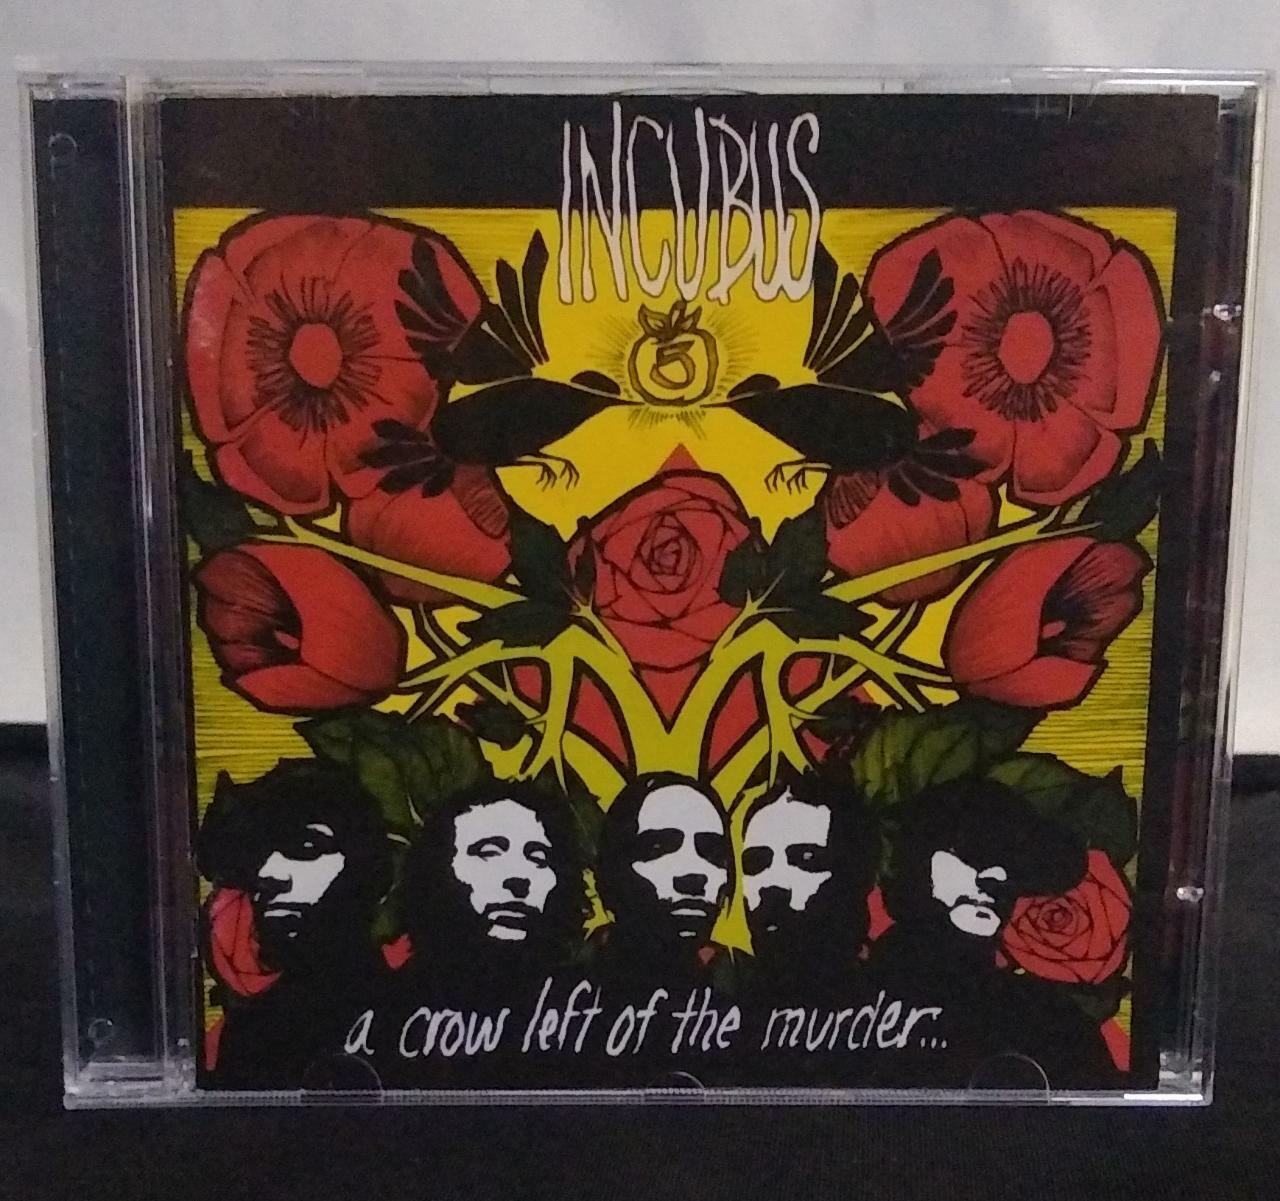 CD - Incubus - A Crow Left of the Murder